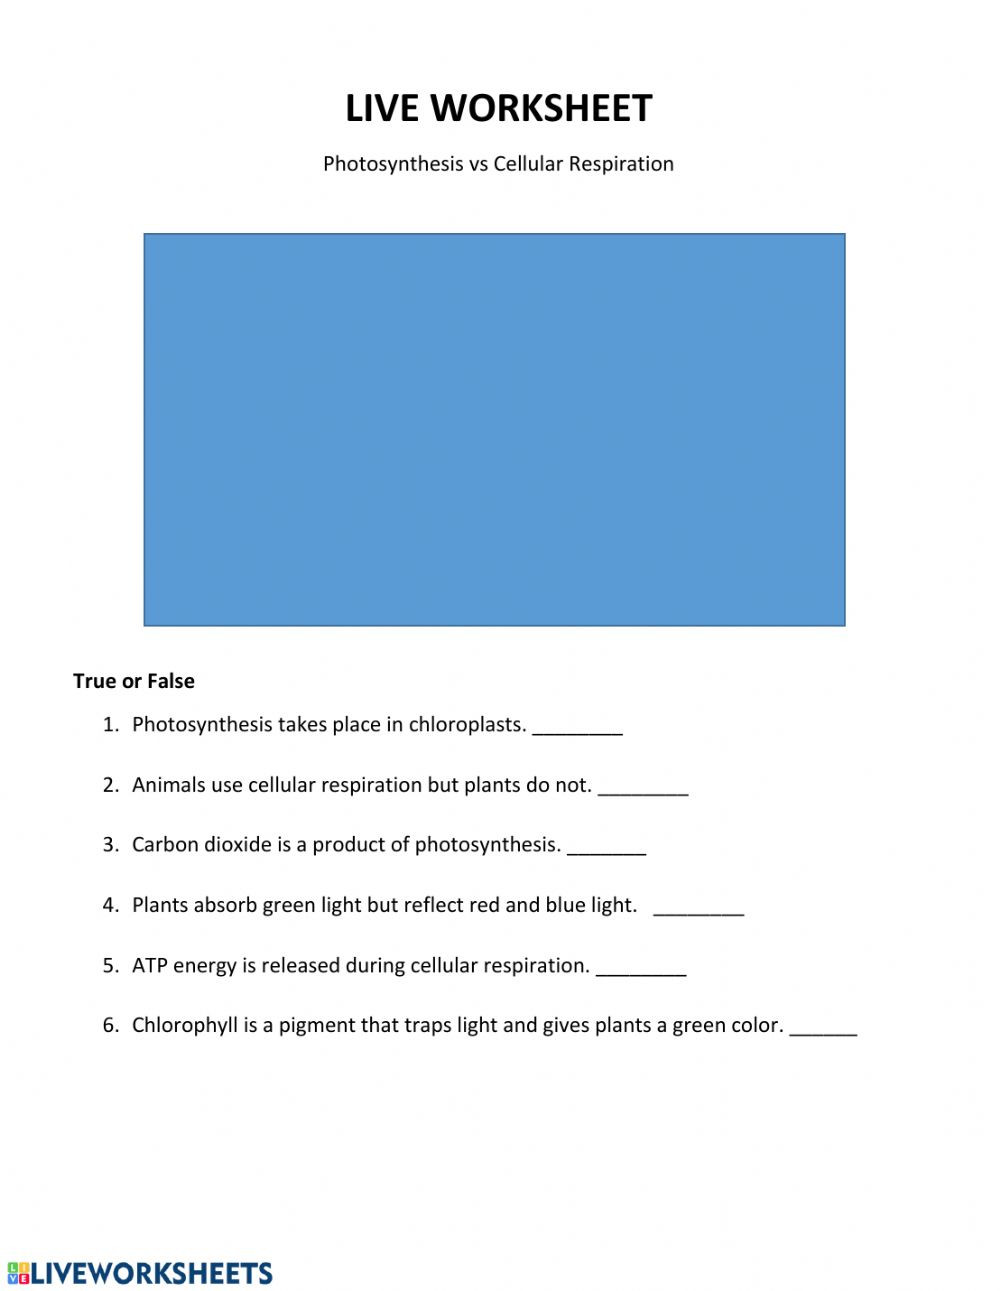 Photosynthesis and Respiration Worksheet Live Work Sheet Synthesis Vs Cellular Respiration